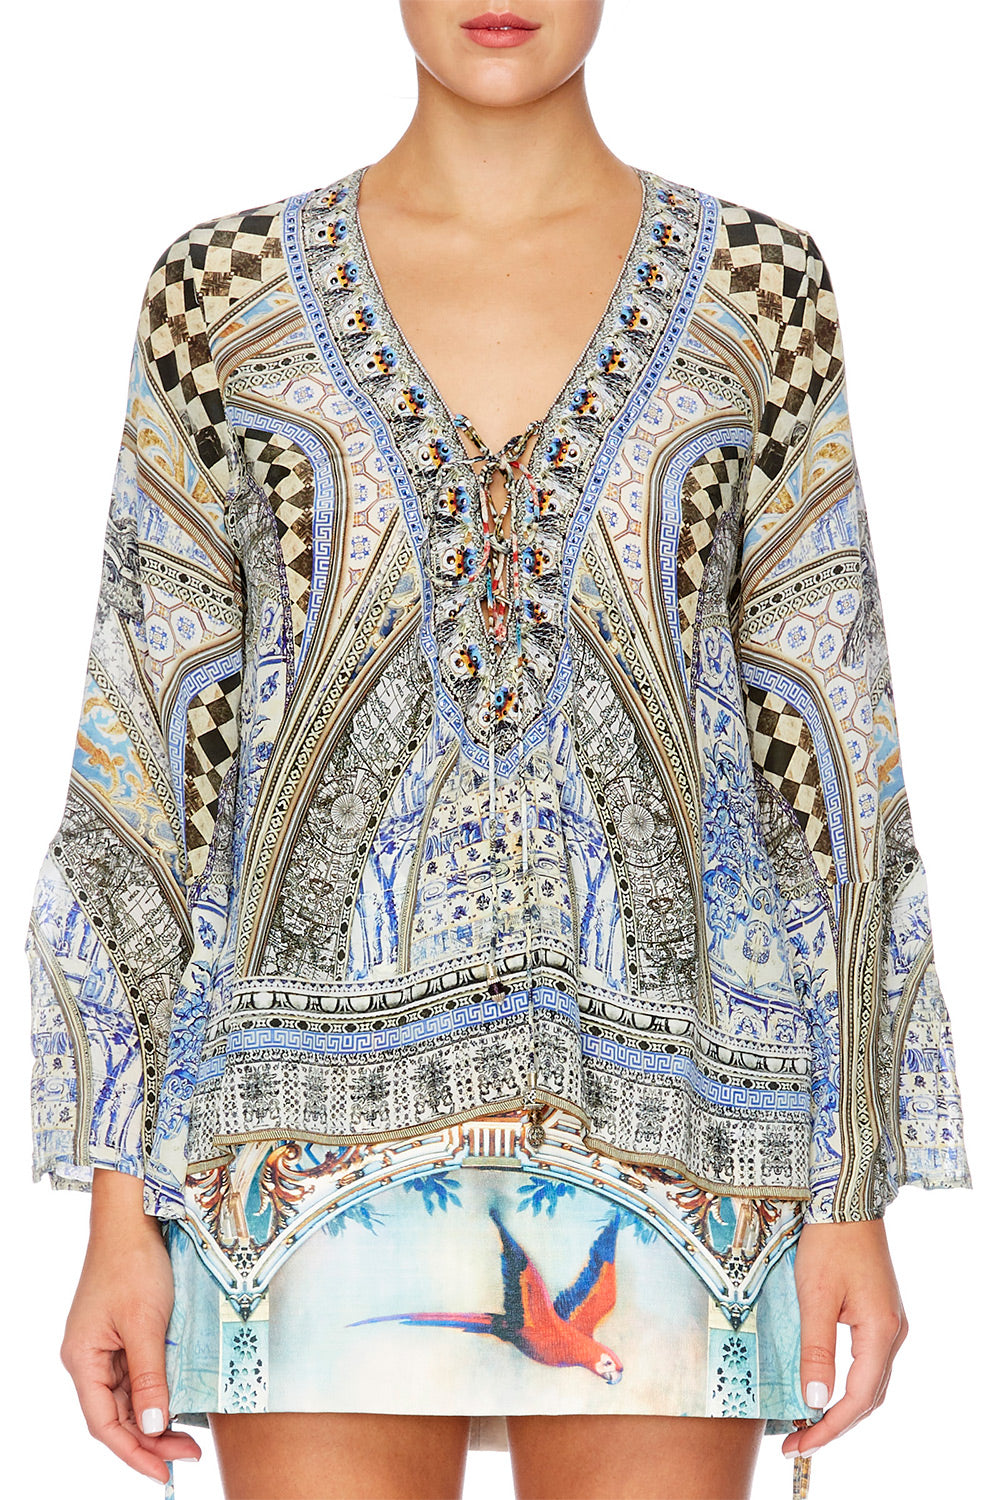 LOST IN A DREAM TIE FRONT BLOUSE